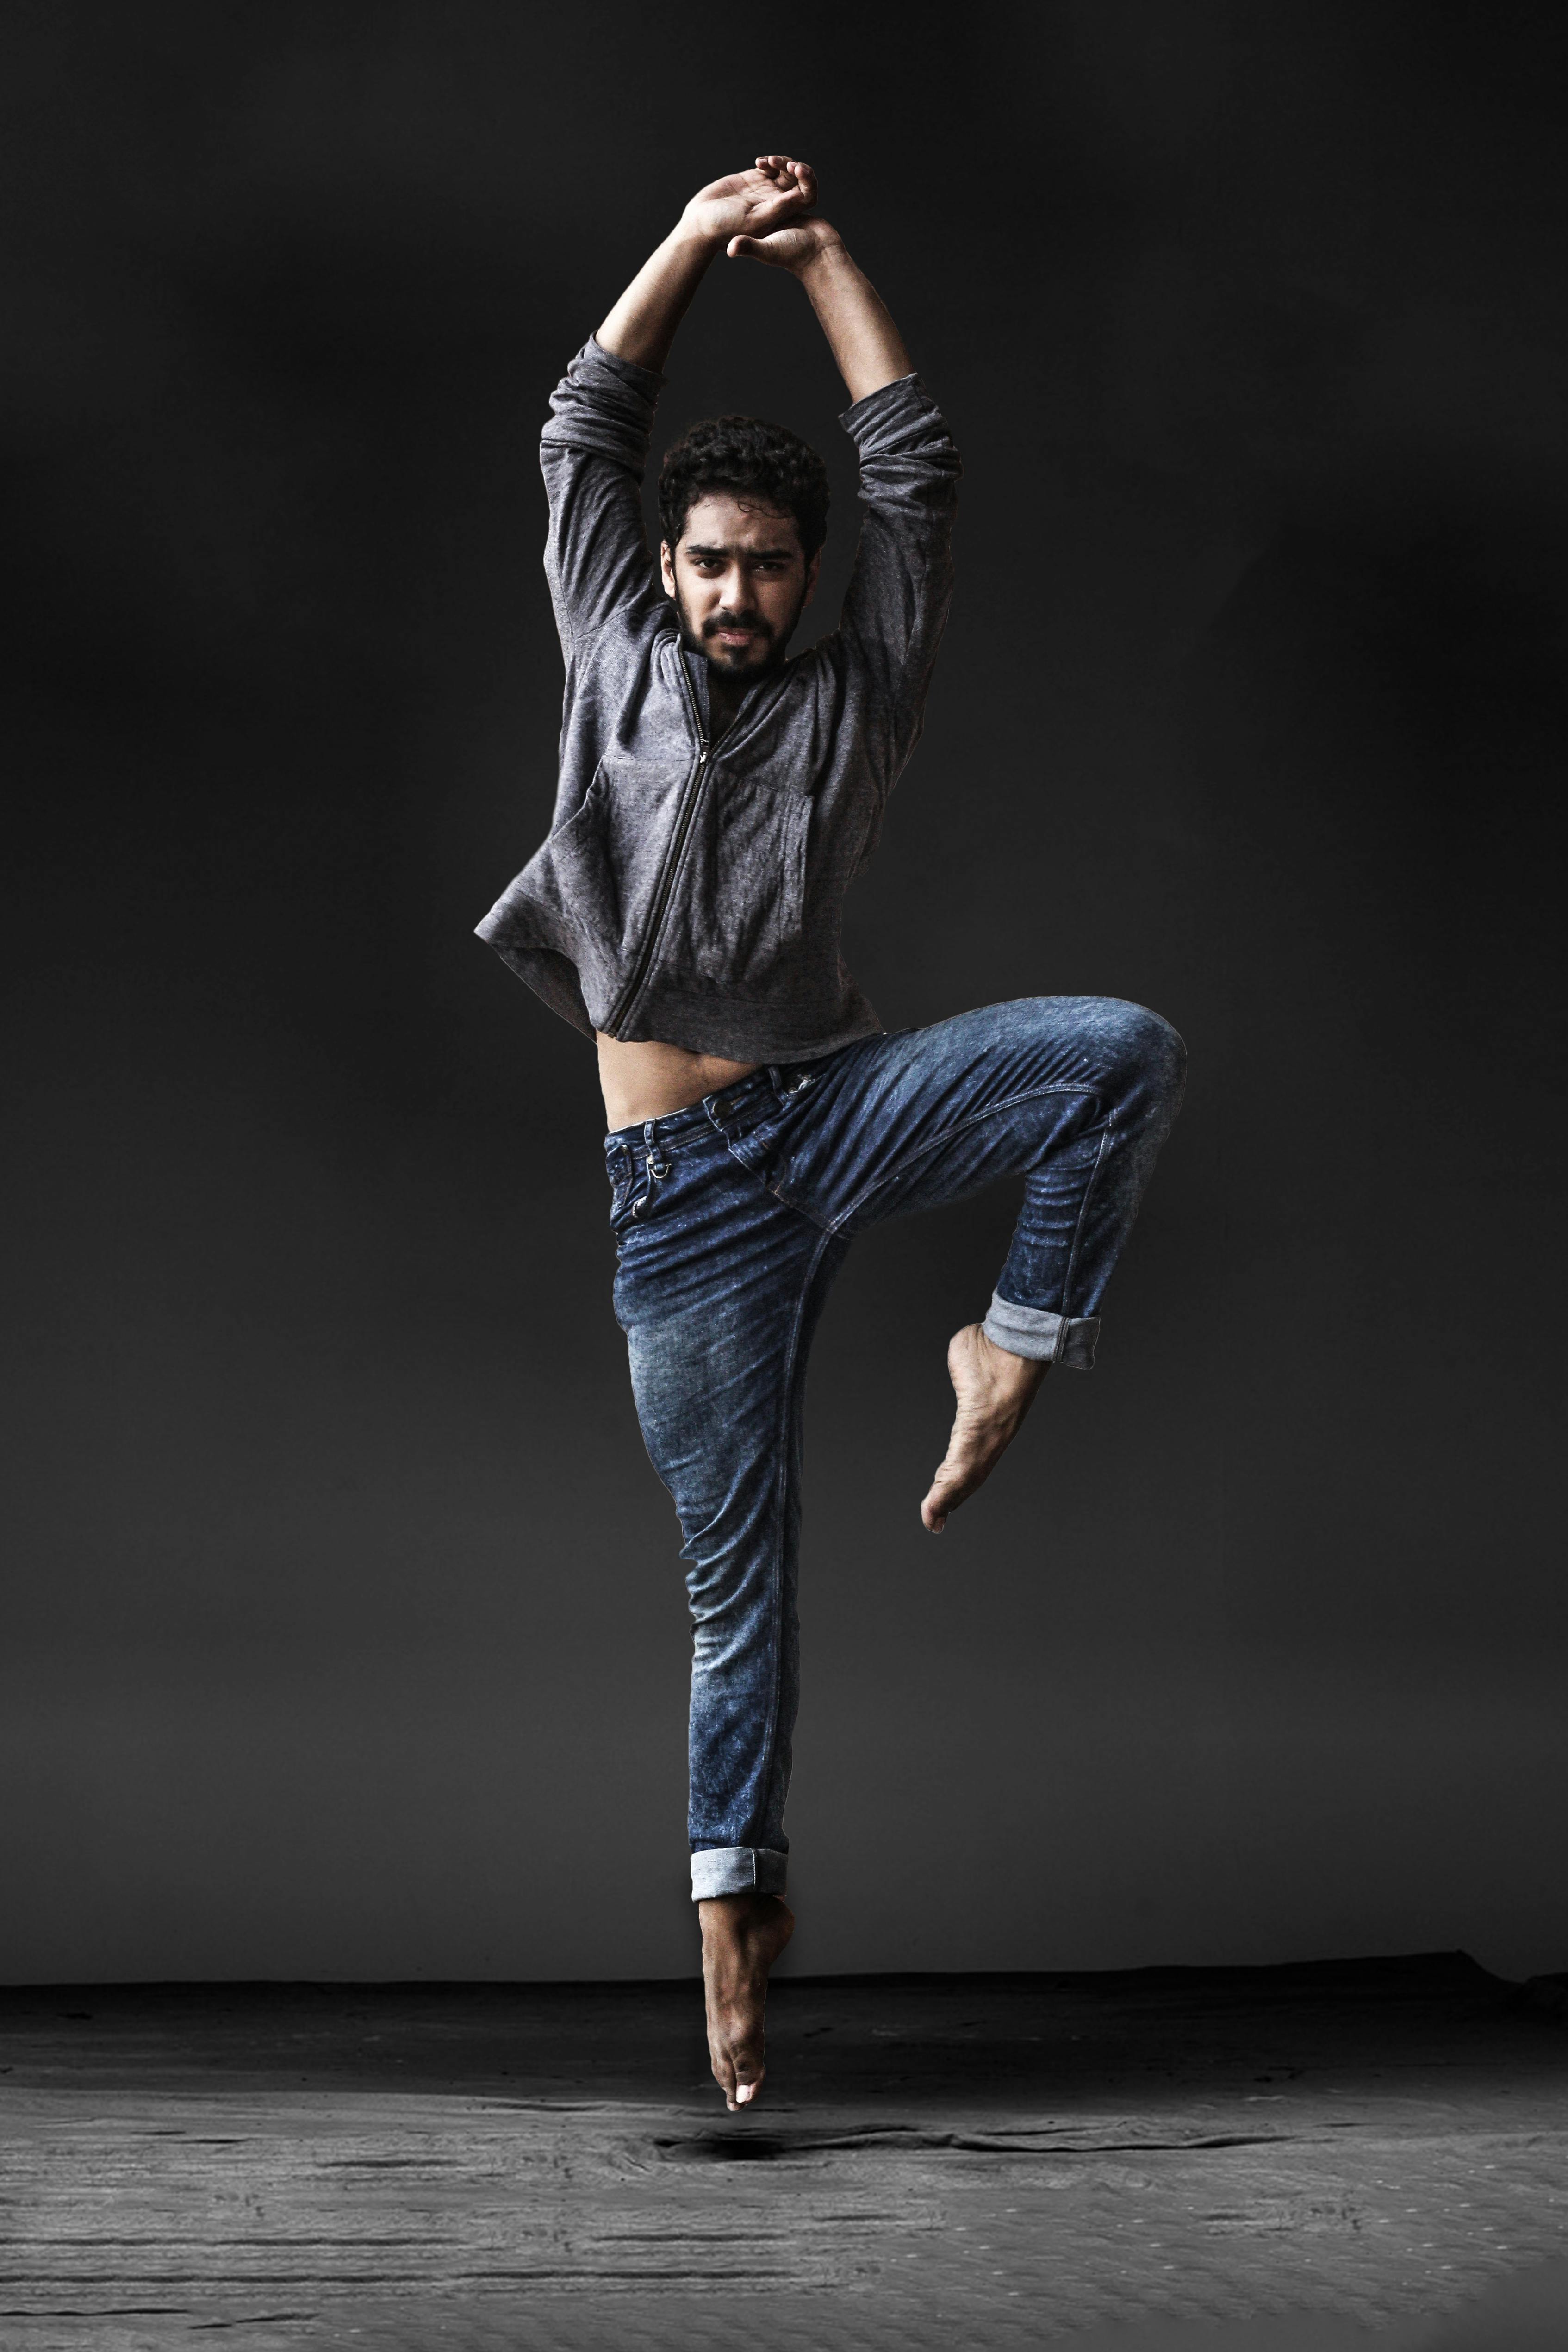 A Young and Fit Male Ballet Dancer Posing in a Studio Stock Photo - Image  of dance, modern: 39677520